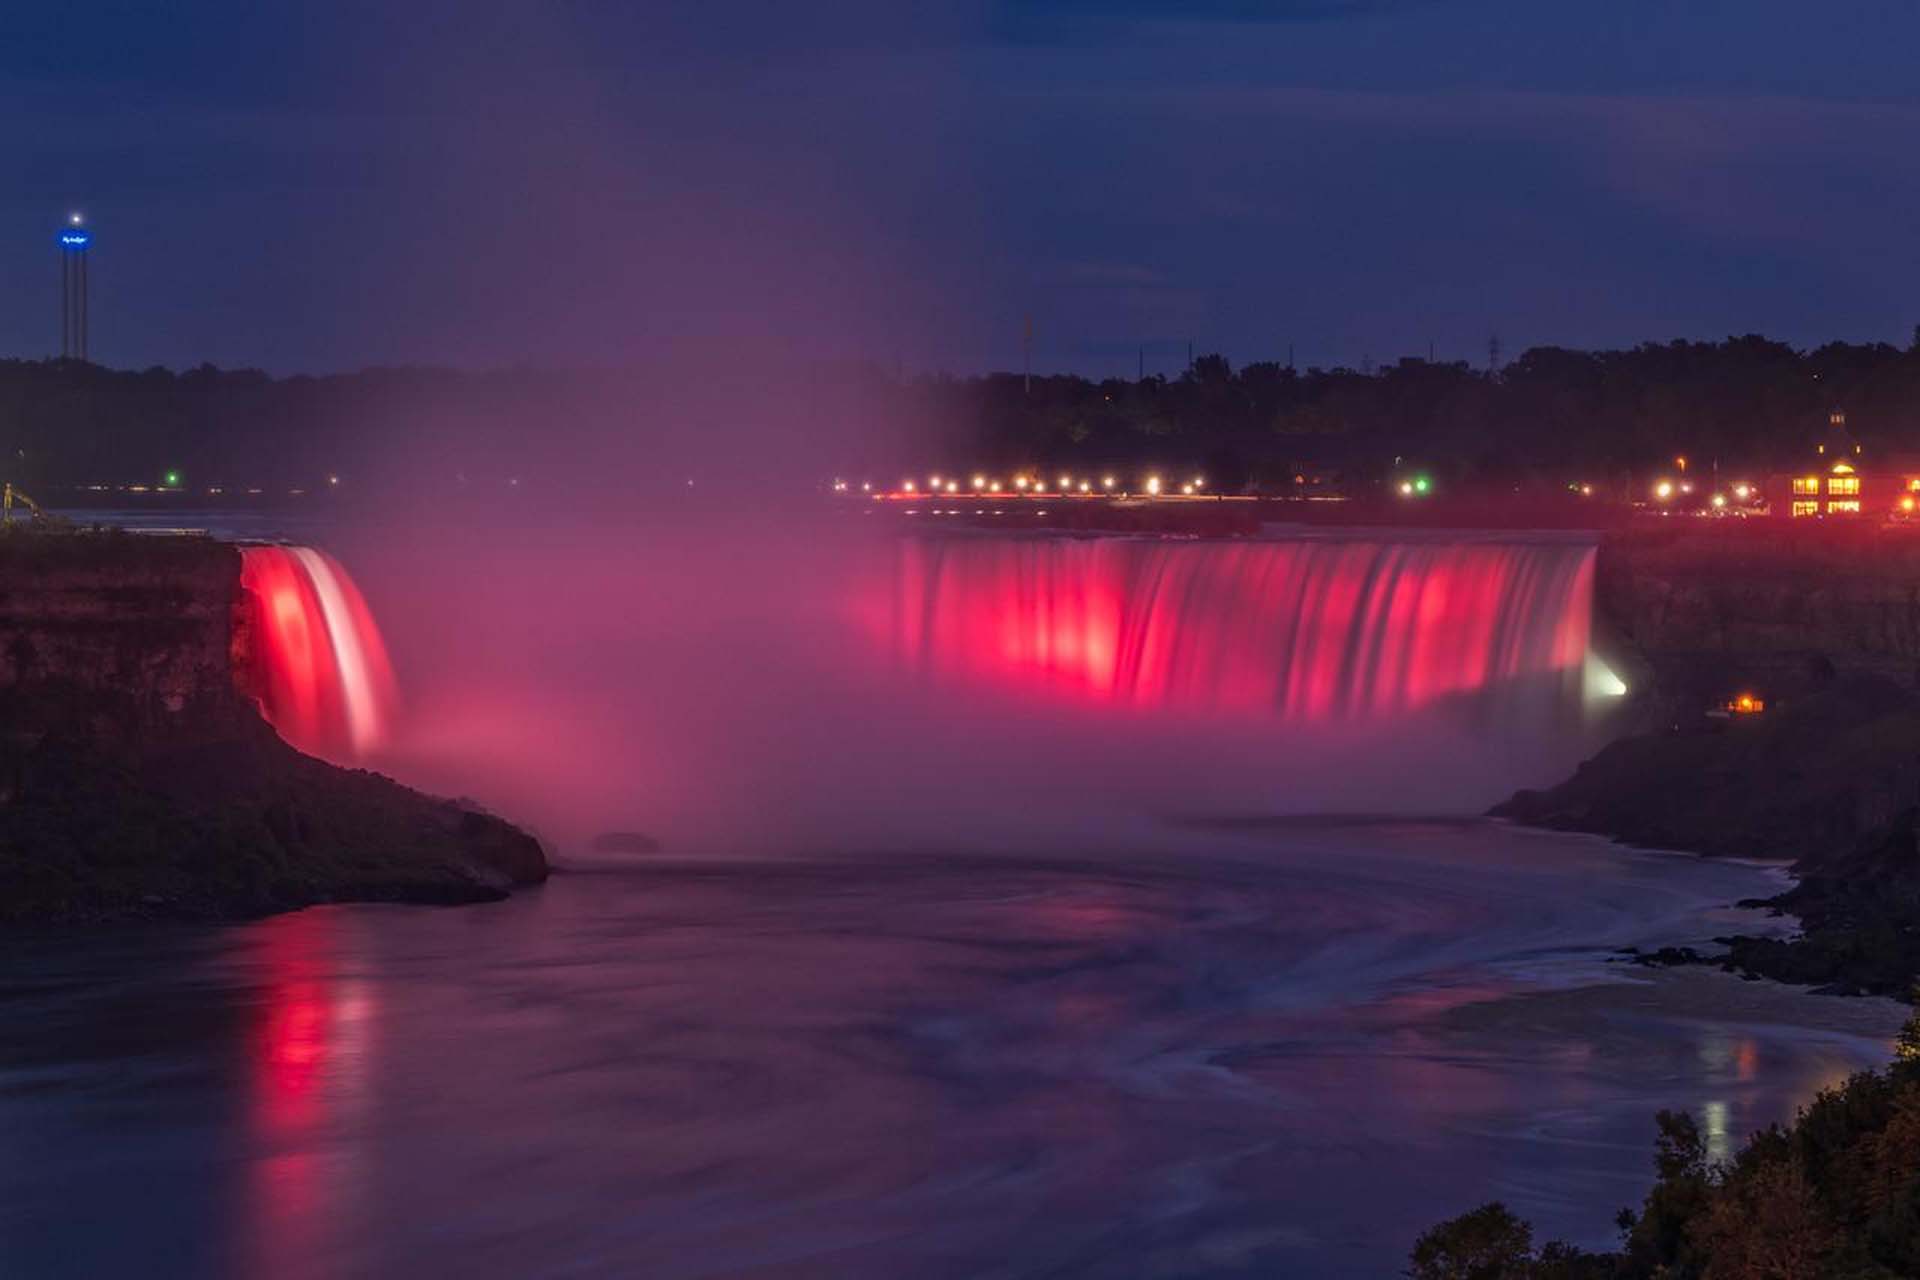 where to stay in niagara falls best hotels and areas